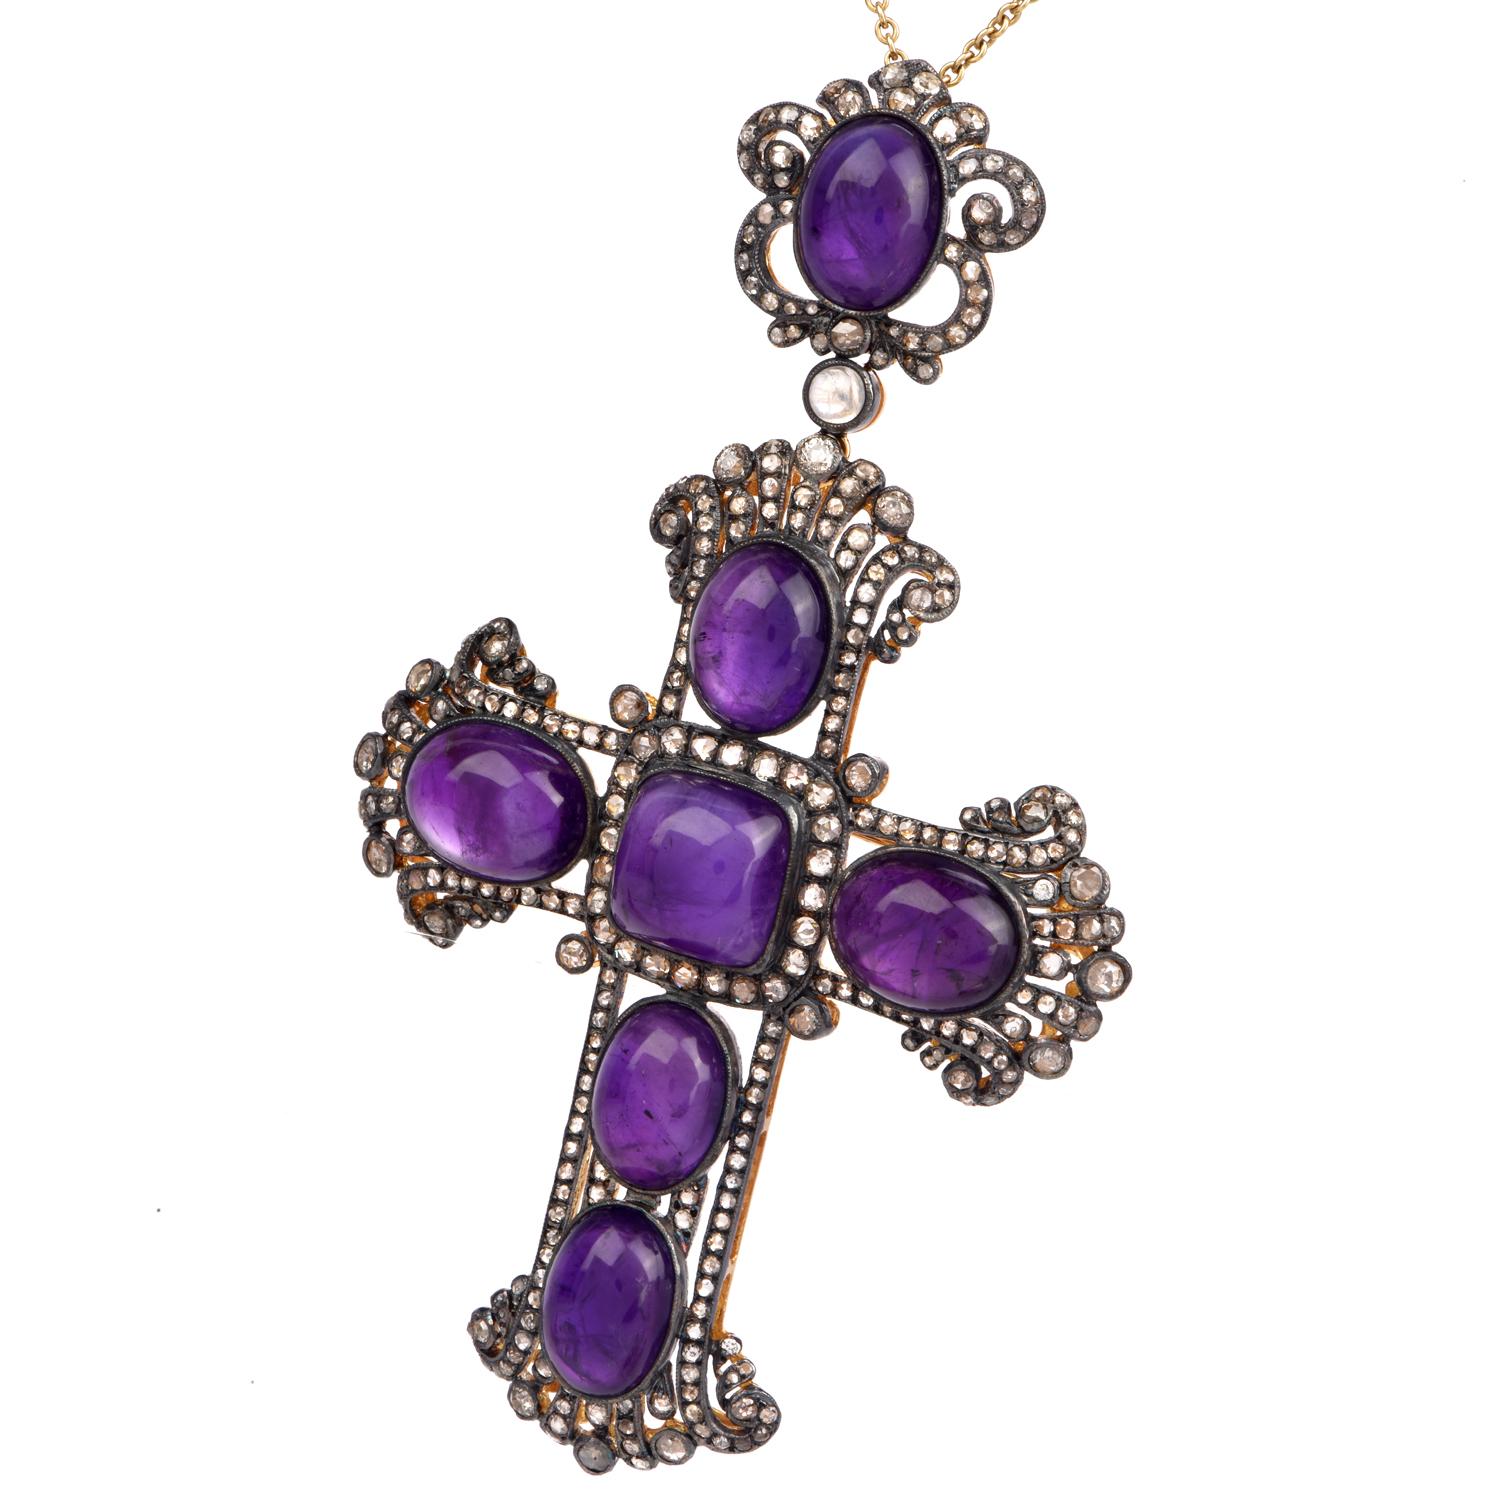 This bold amethyst and diamond cross pendant enhancer & pin brooch is crafted in solid silver and 18k gold  Weighing 26.7 grams and measuring 3.75” long x 2.25” wide. Features 7 prominent bezel-set amethyst cabochons collectively weighing approx.